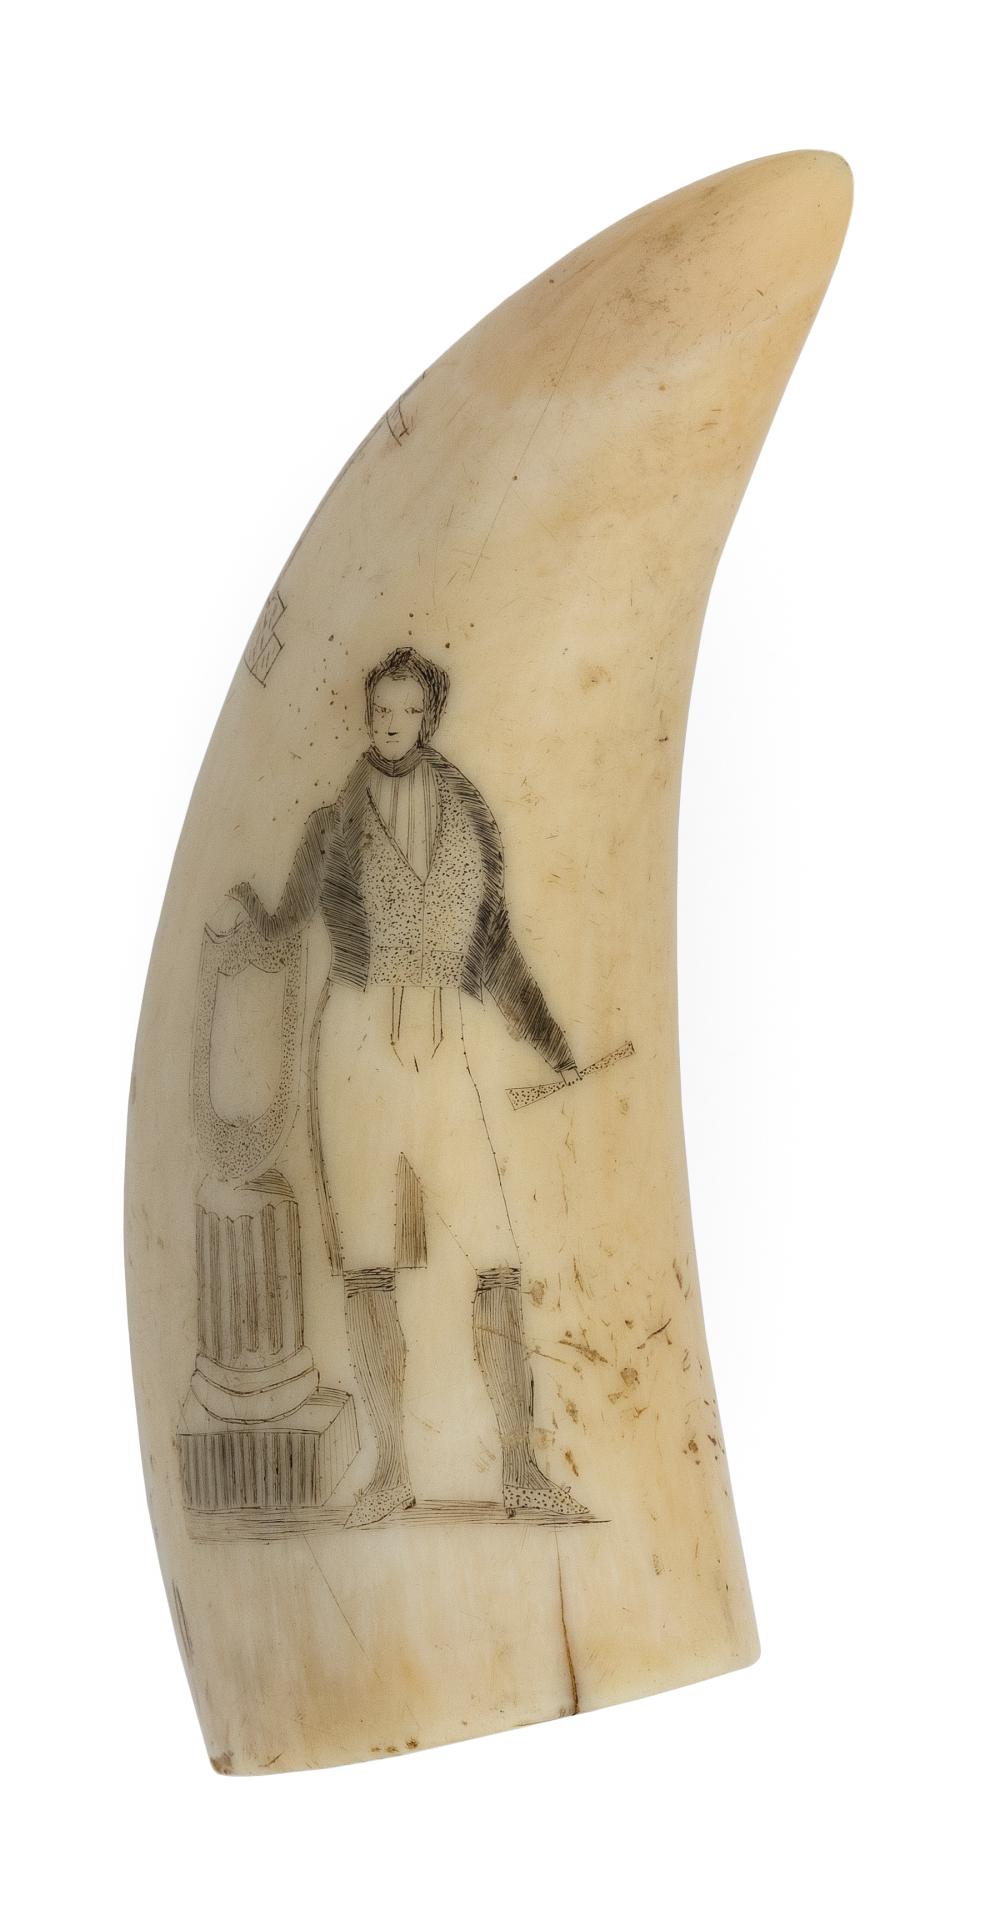 SCRIMSHAW WHALE'S TOOTH WITH SEVERAL